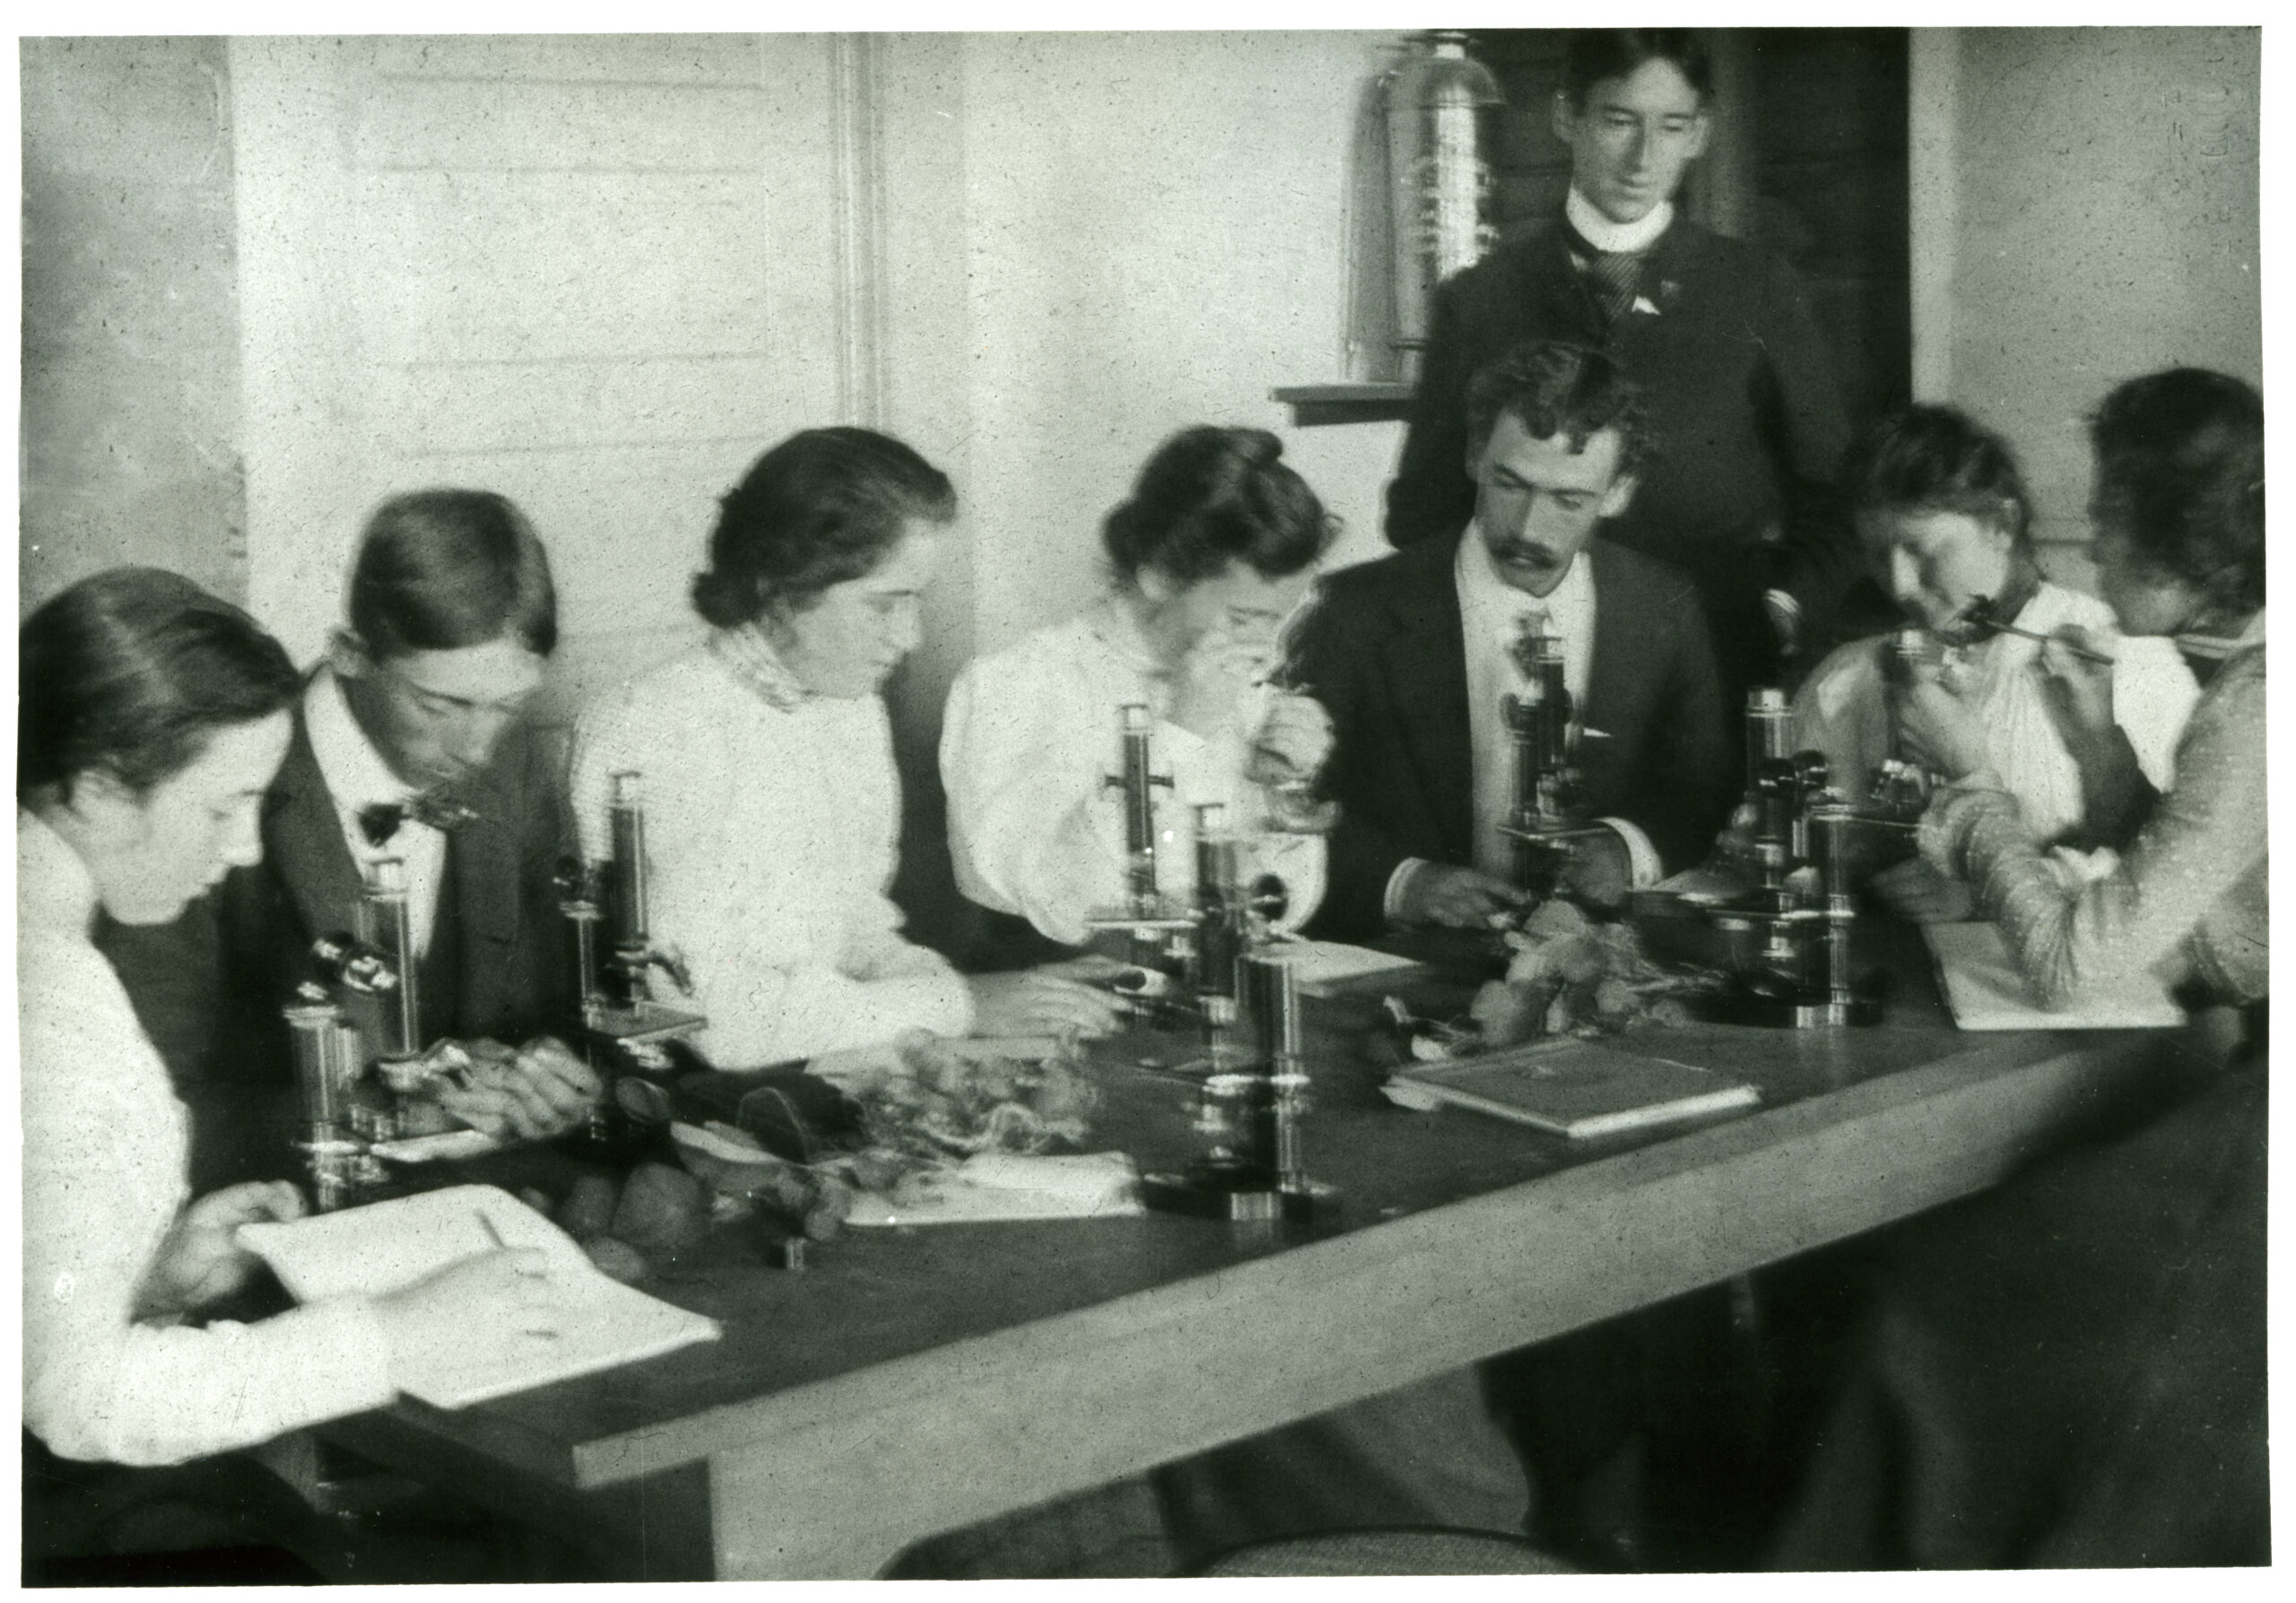 Women dressed in white blouses and men in suit jackets use microscopes